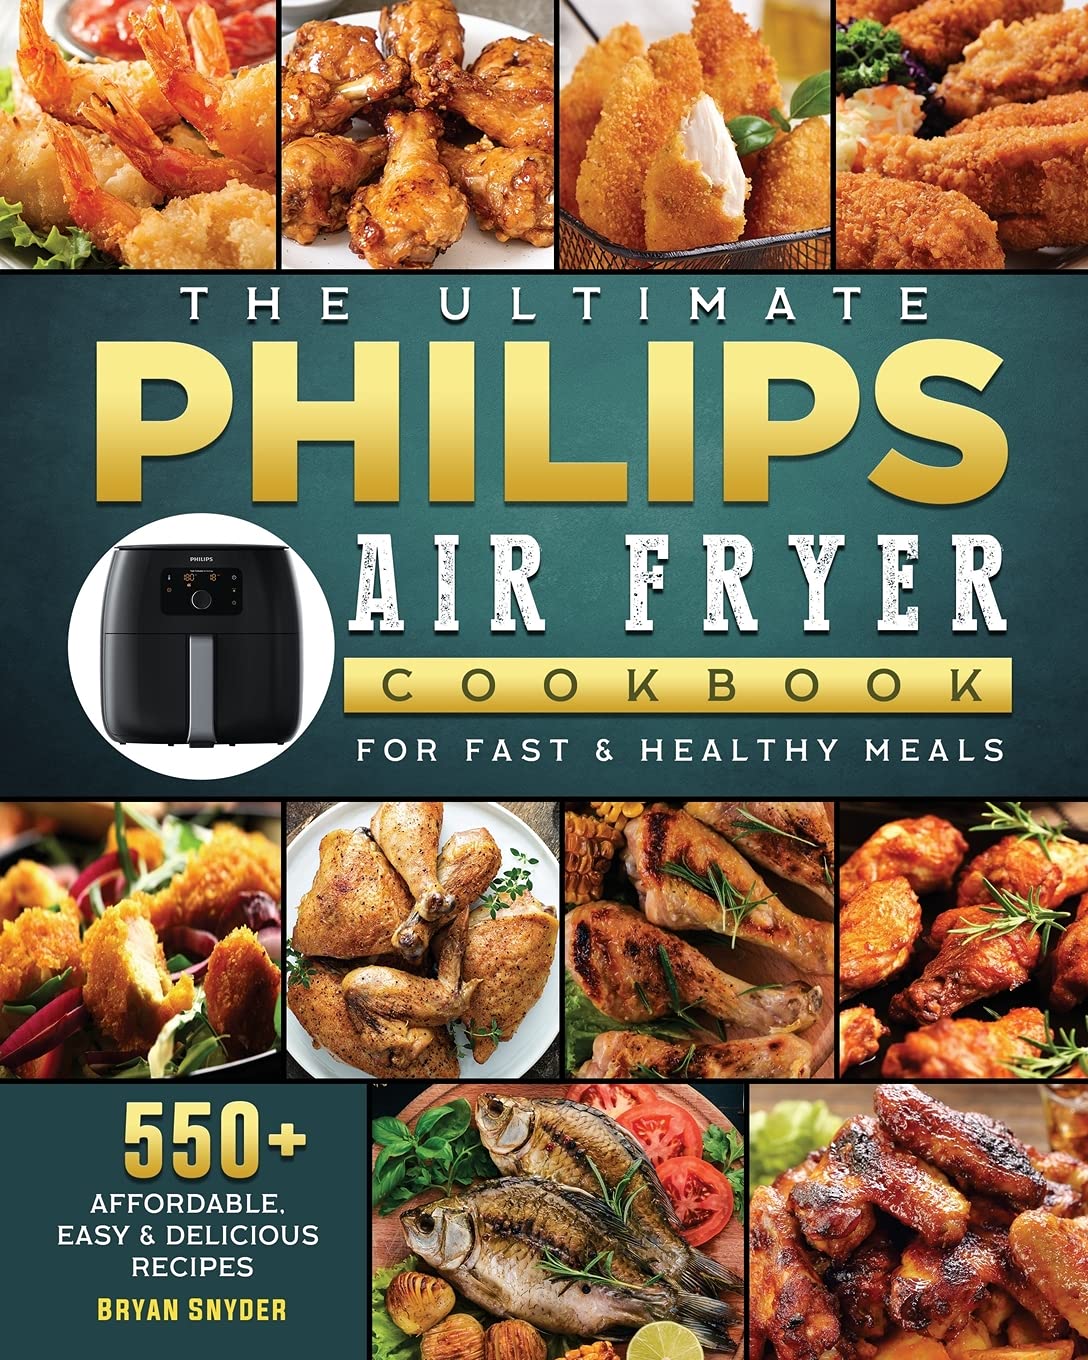 The Ultimate Philips Air fryer Cookbook